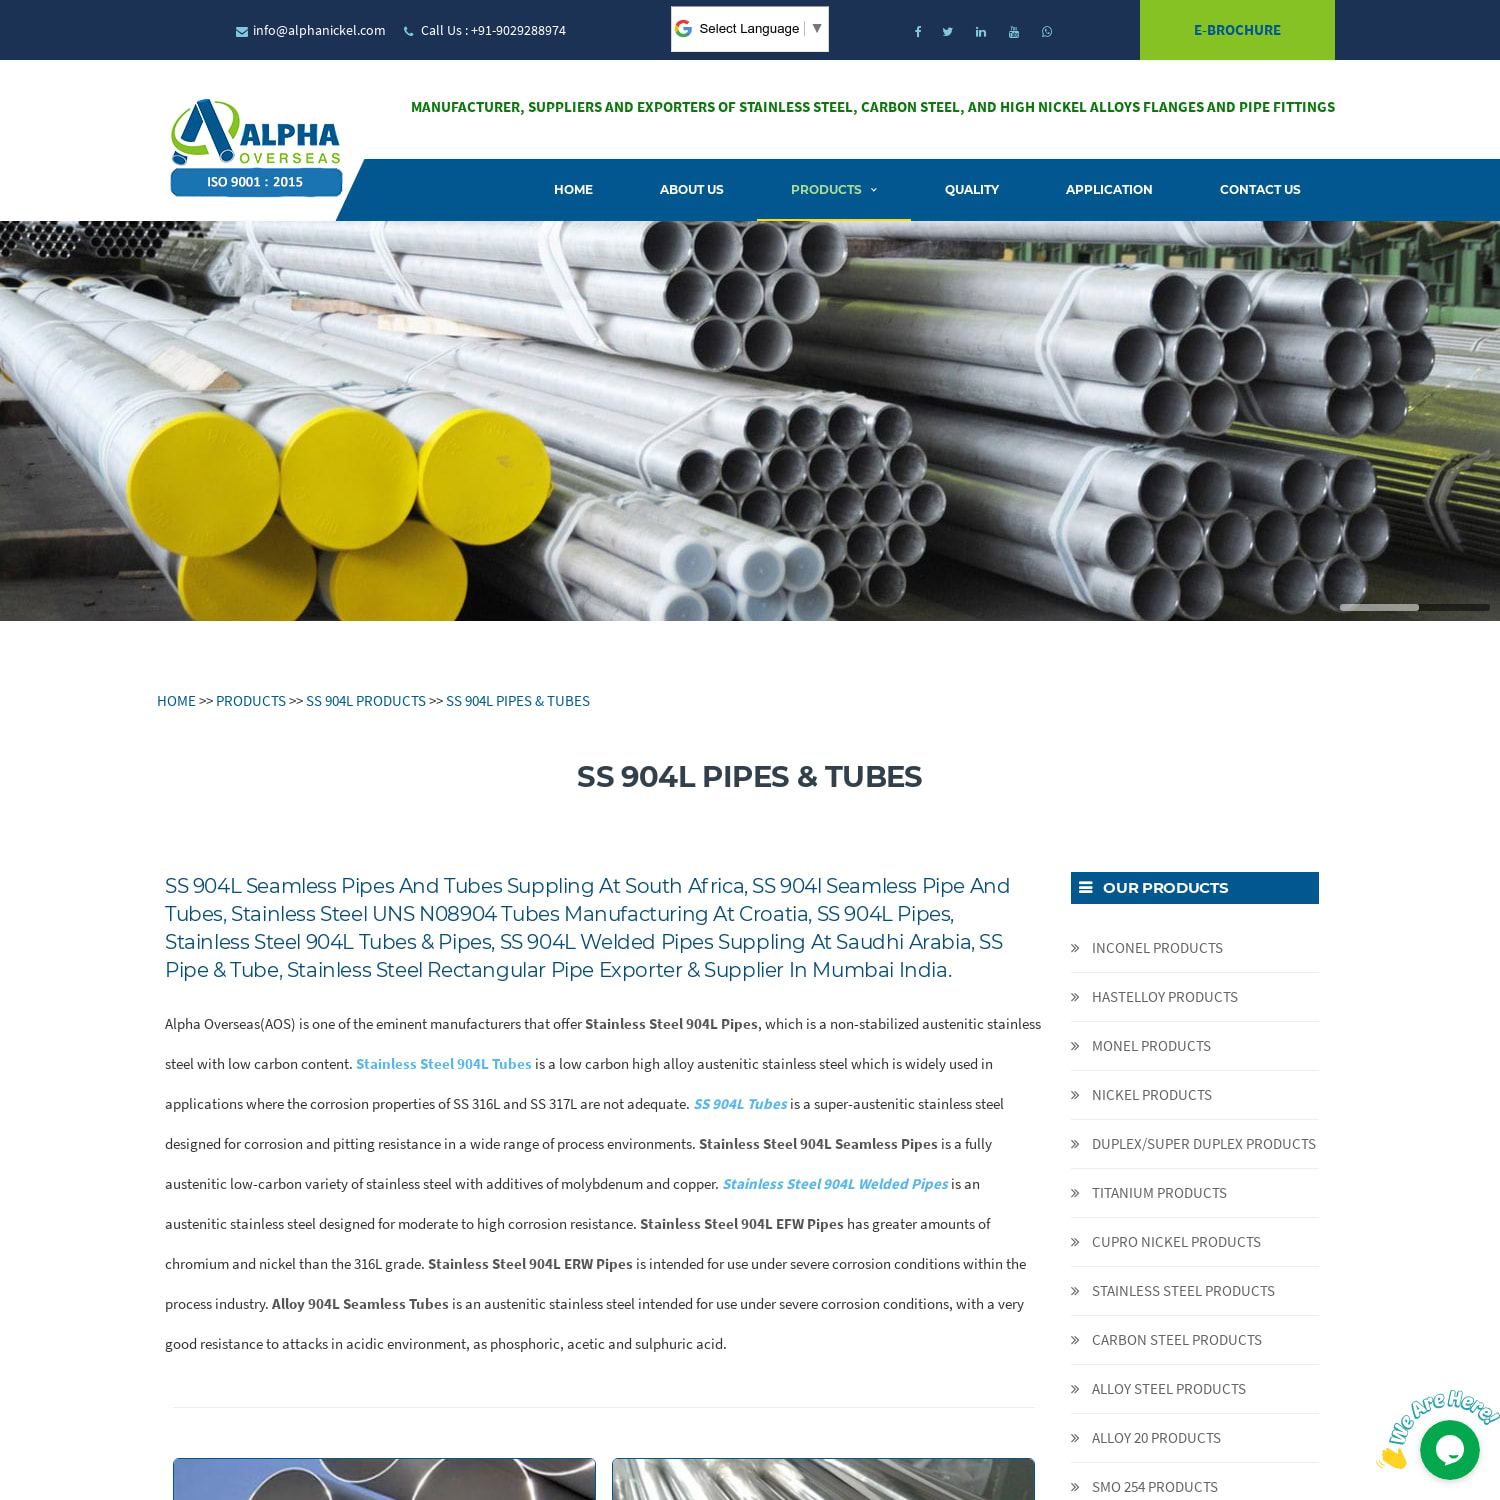 SS 904L Seamless Pipes and Tubes, Stainless Steel 904L Welded Pipes & Tubes Manufacturers & Suppliers